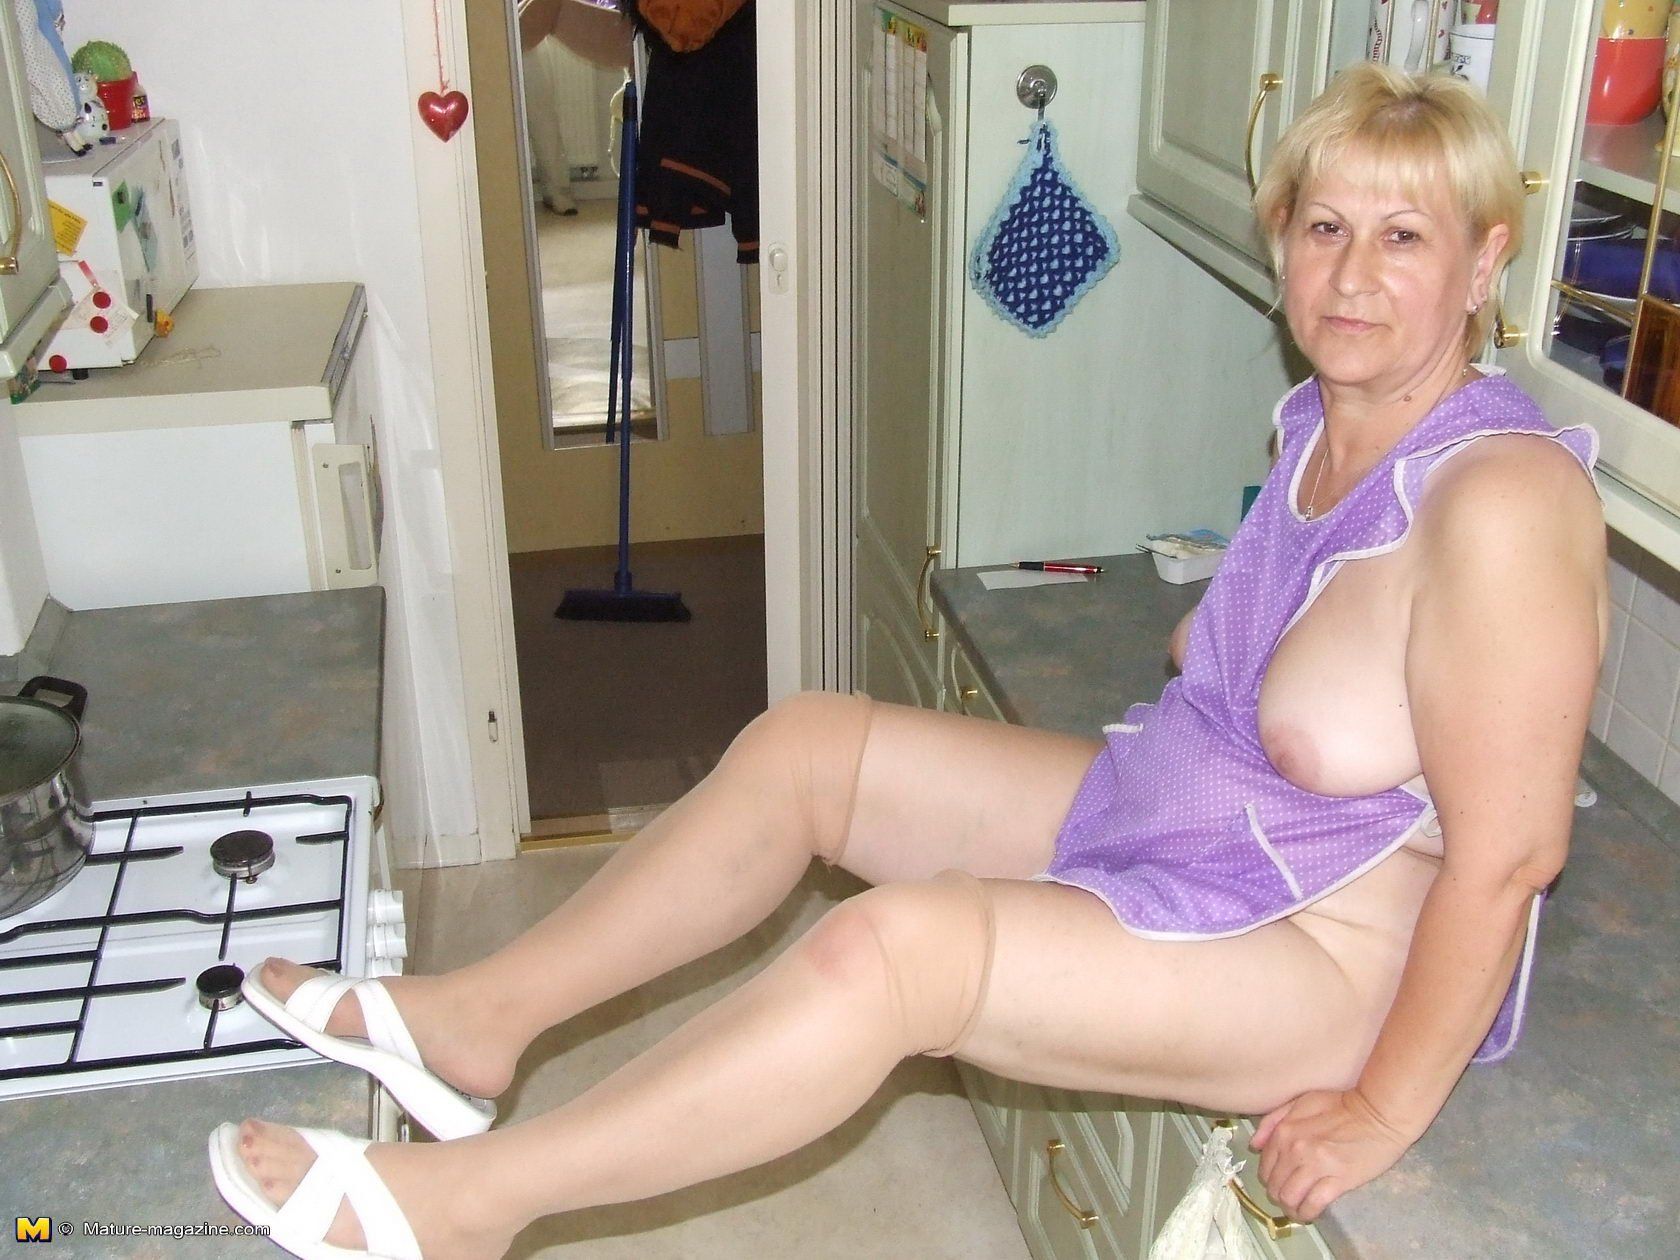 Amateur housewife tgp. Most watched pics site photo